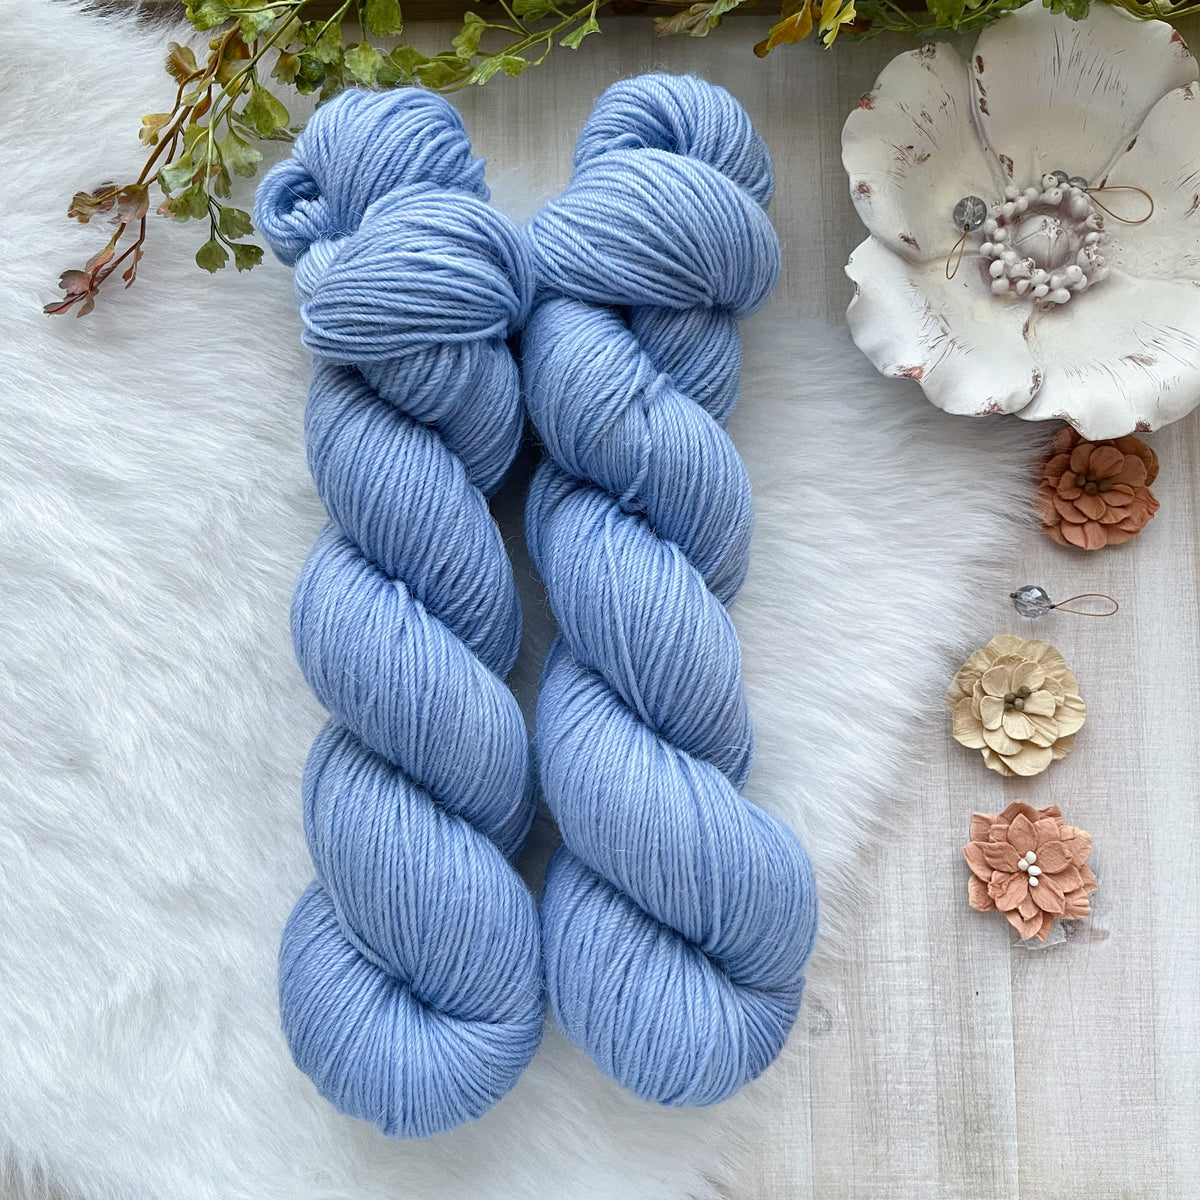 RAINDROPS - Dyed to Order- Dreamy Base Handdyed Yarn